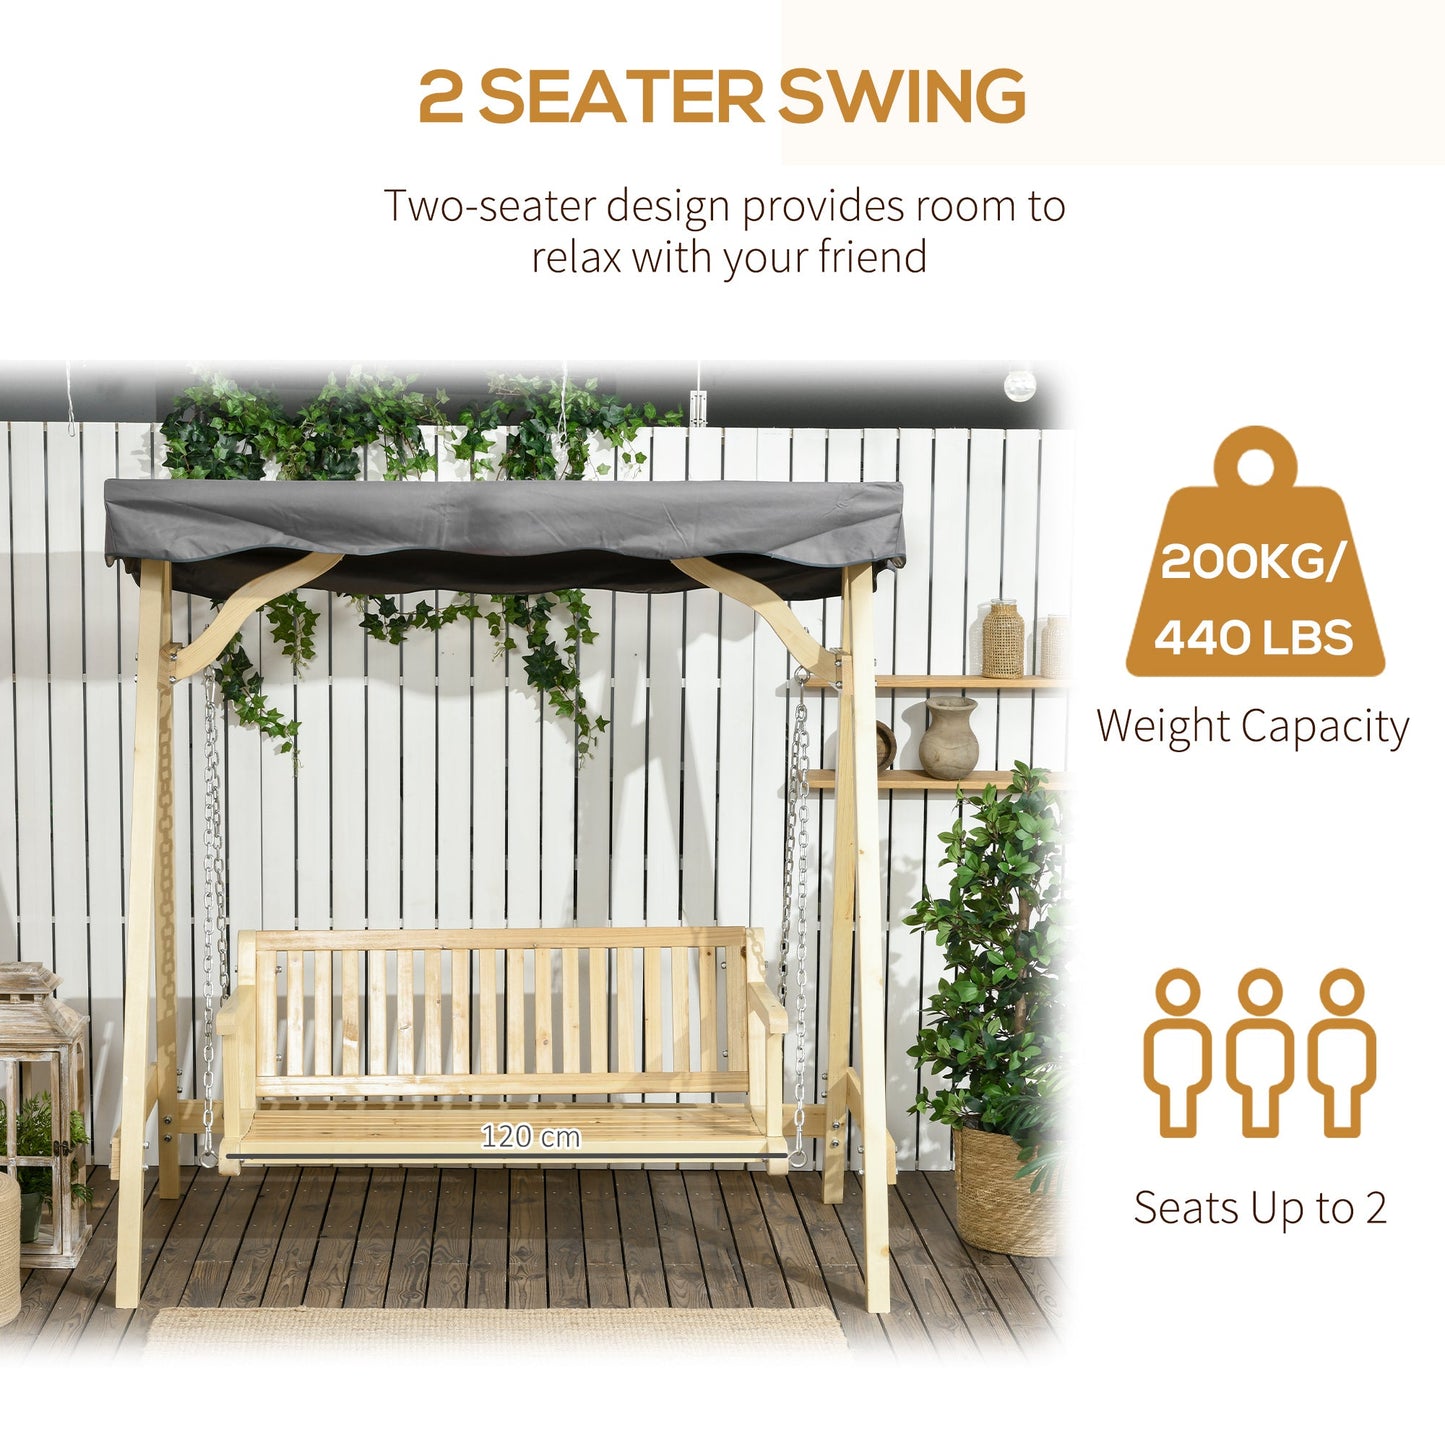 Outdoor and Garden-2-Person Outdoor Swing Porch Swing with Wooden Stand, Strong A-Frame Design, & Adjustable Water-Fighting Canopy, Gray - Outdoor Style Company